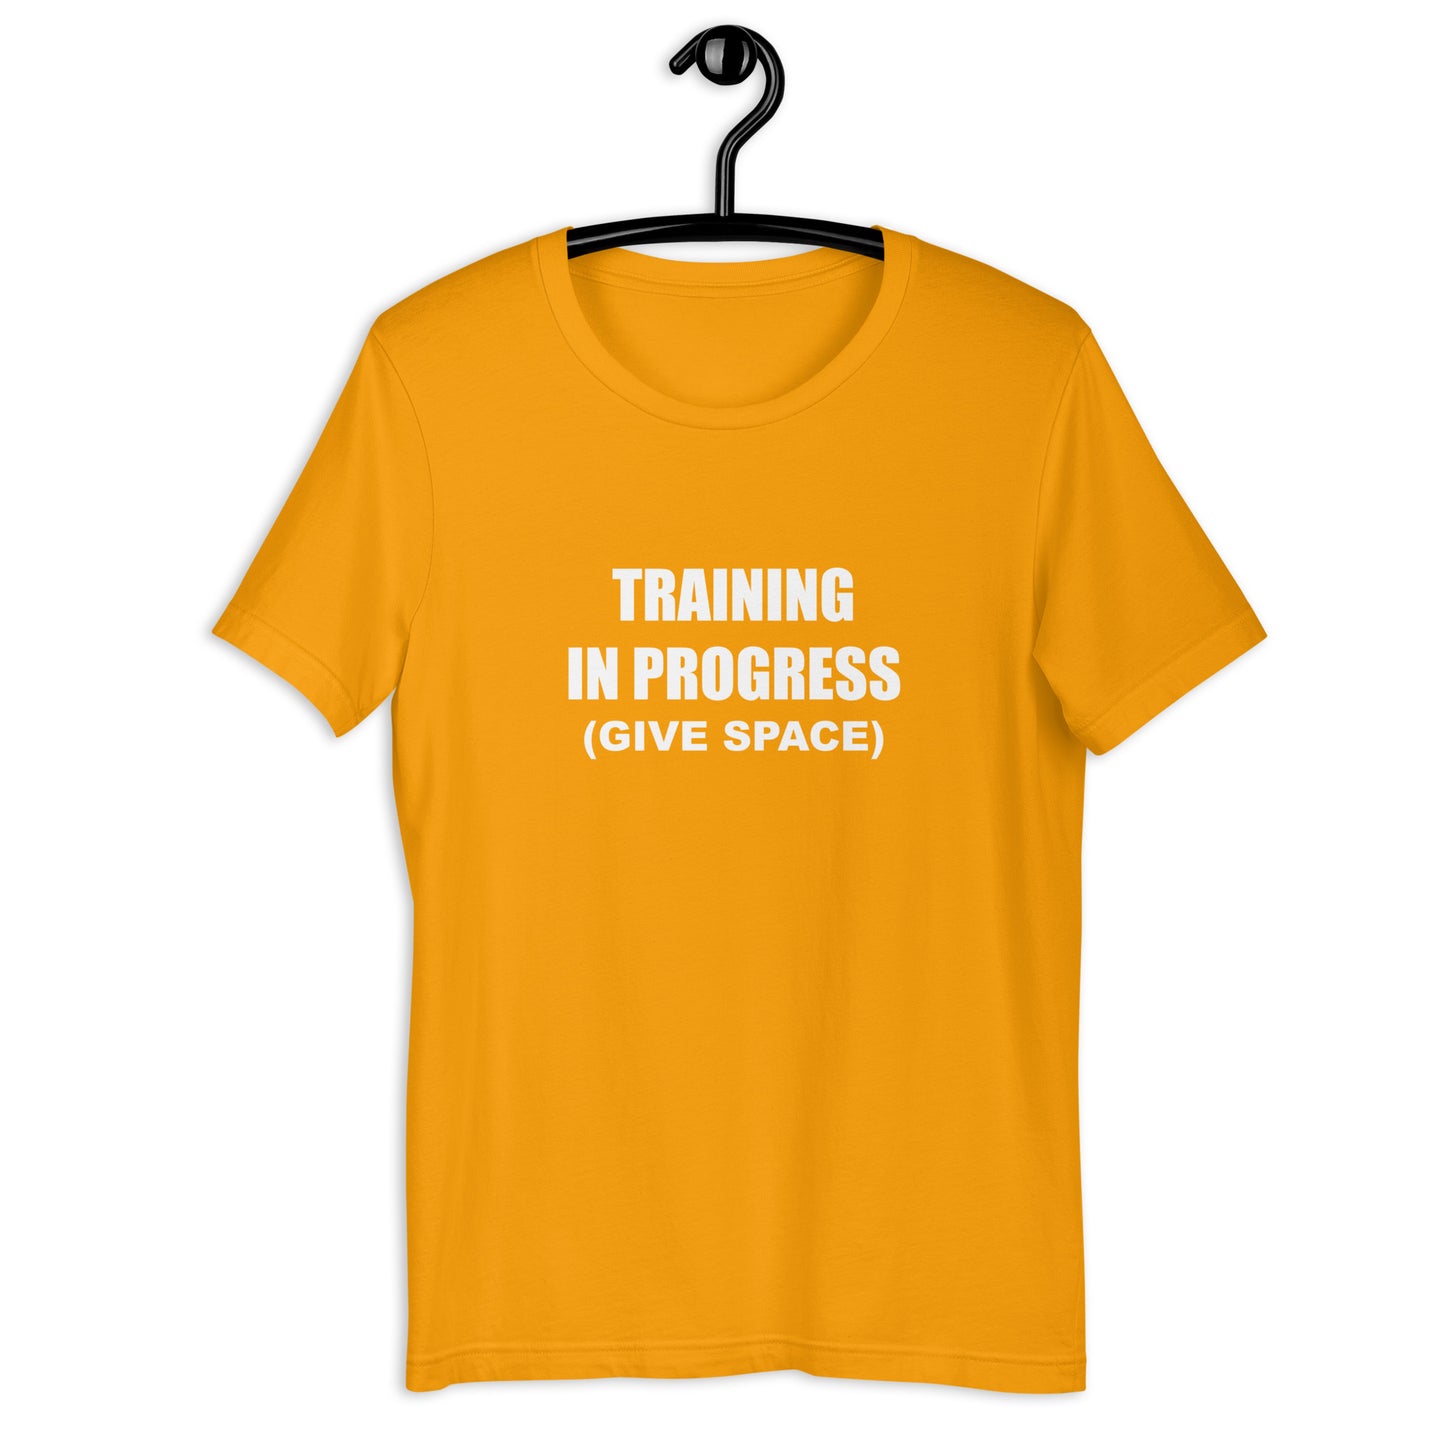 TRAINING - GIVE SPACE - Unisex t-shirt